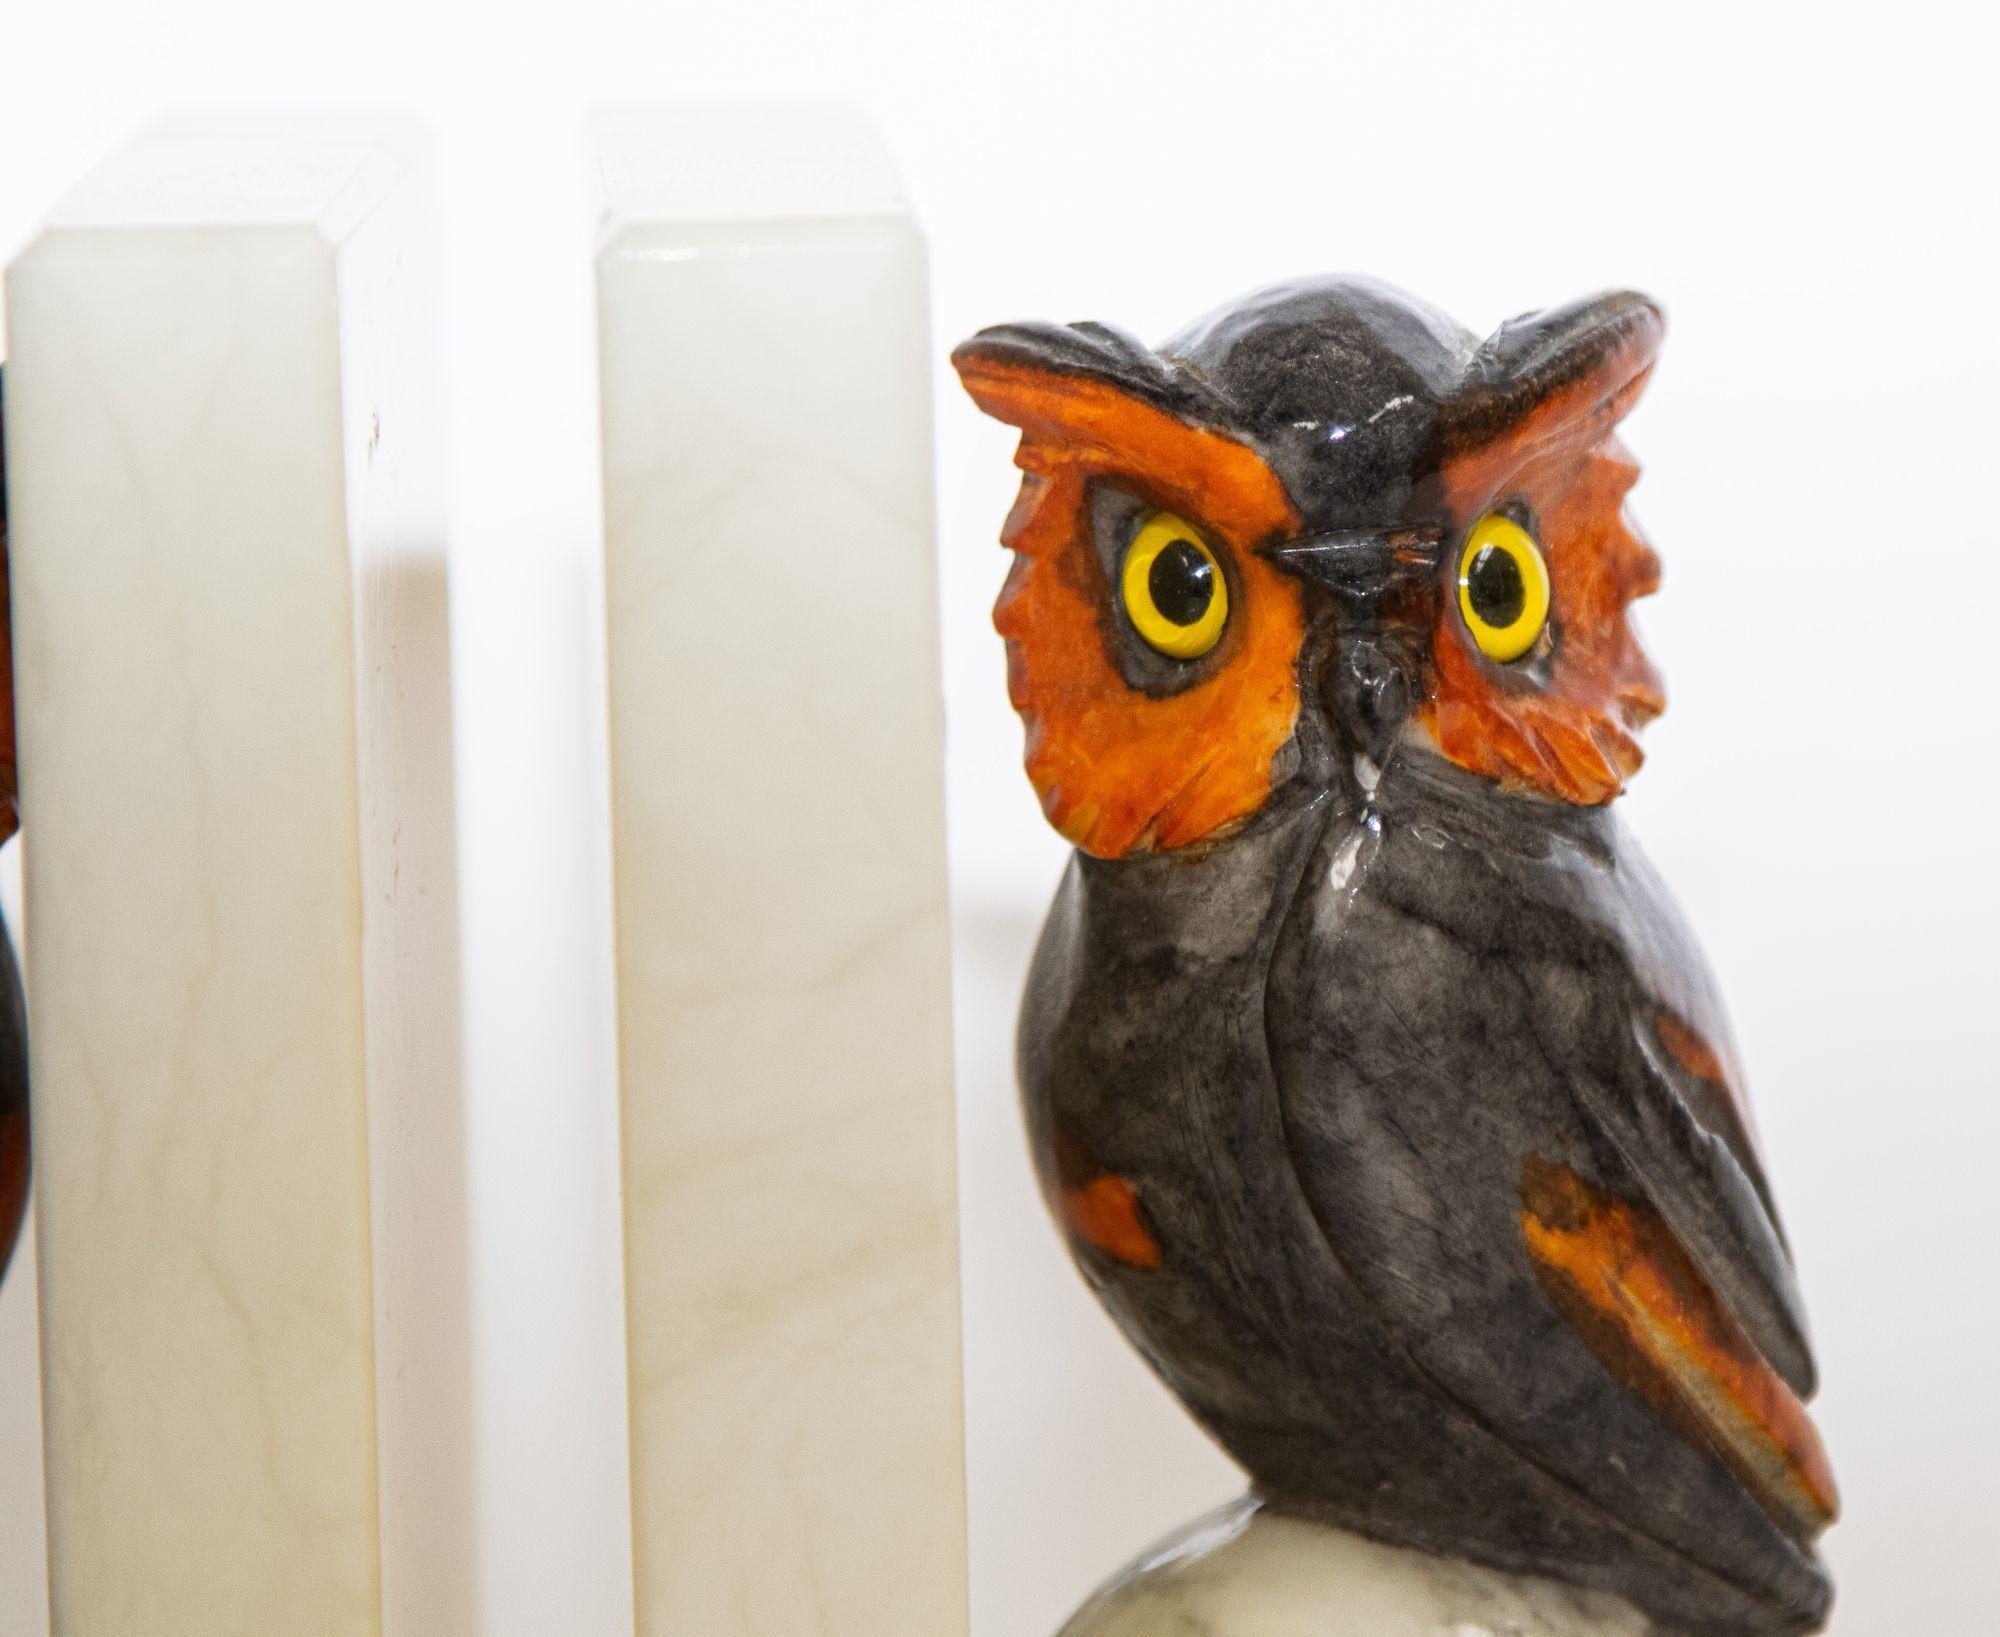 Beautiful midcentury Italian hand-carved alabaster owl bookends.
Hand carved alabaster owls hand-painted in black and red with the original glass eyes on a white marble base.
These Italian hand-sculpted marble owls are beautiful in shape and color